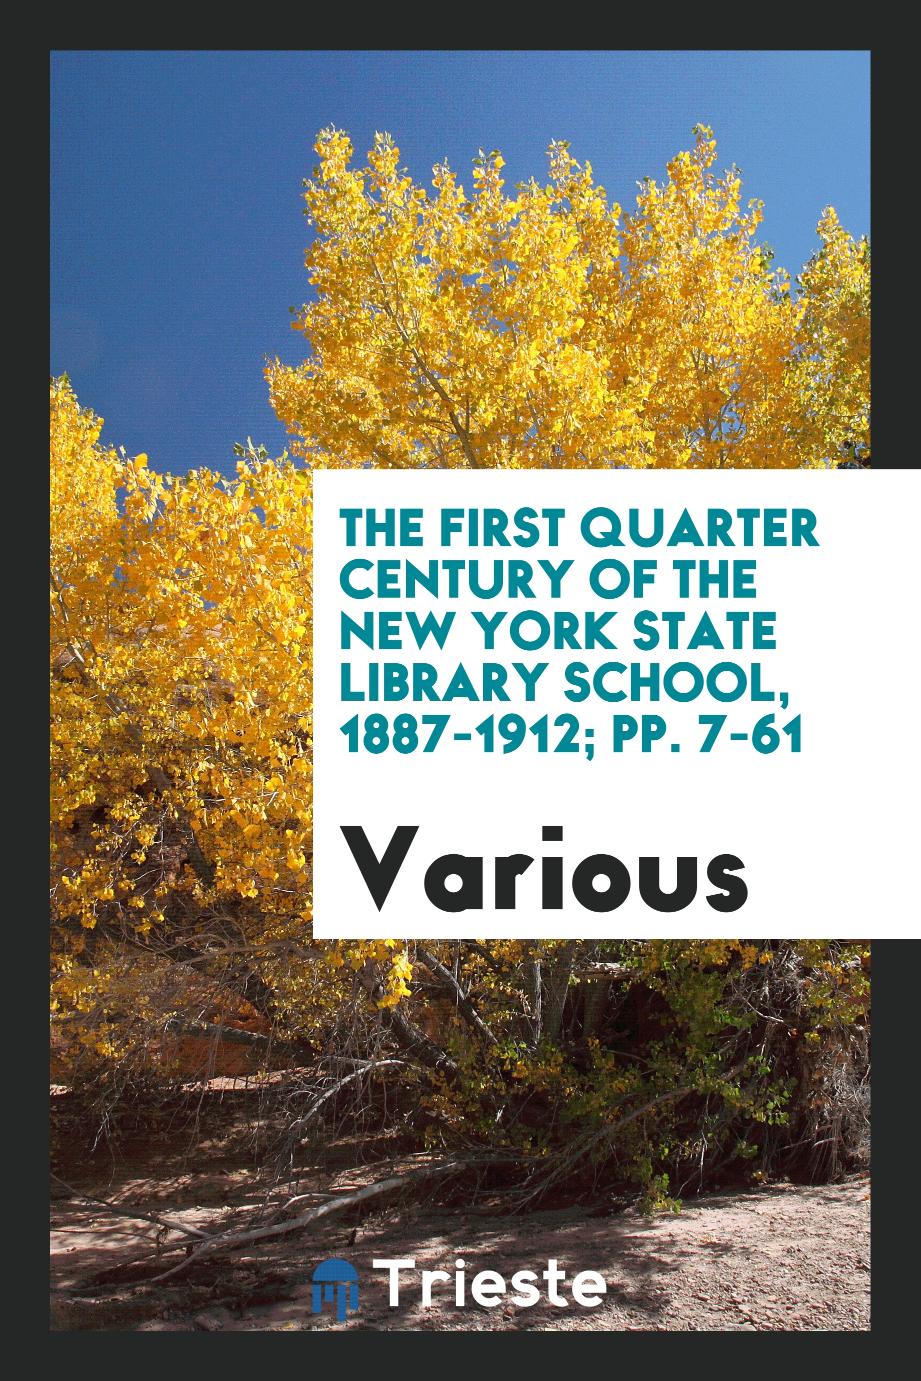 The First Quarter Century of the New York State Library School, 1887-1912; pp. 7-61